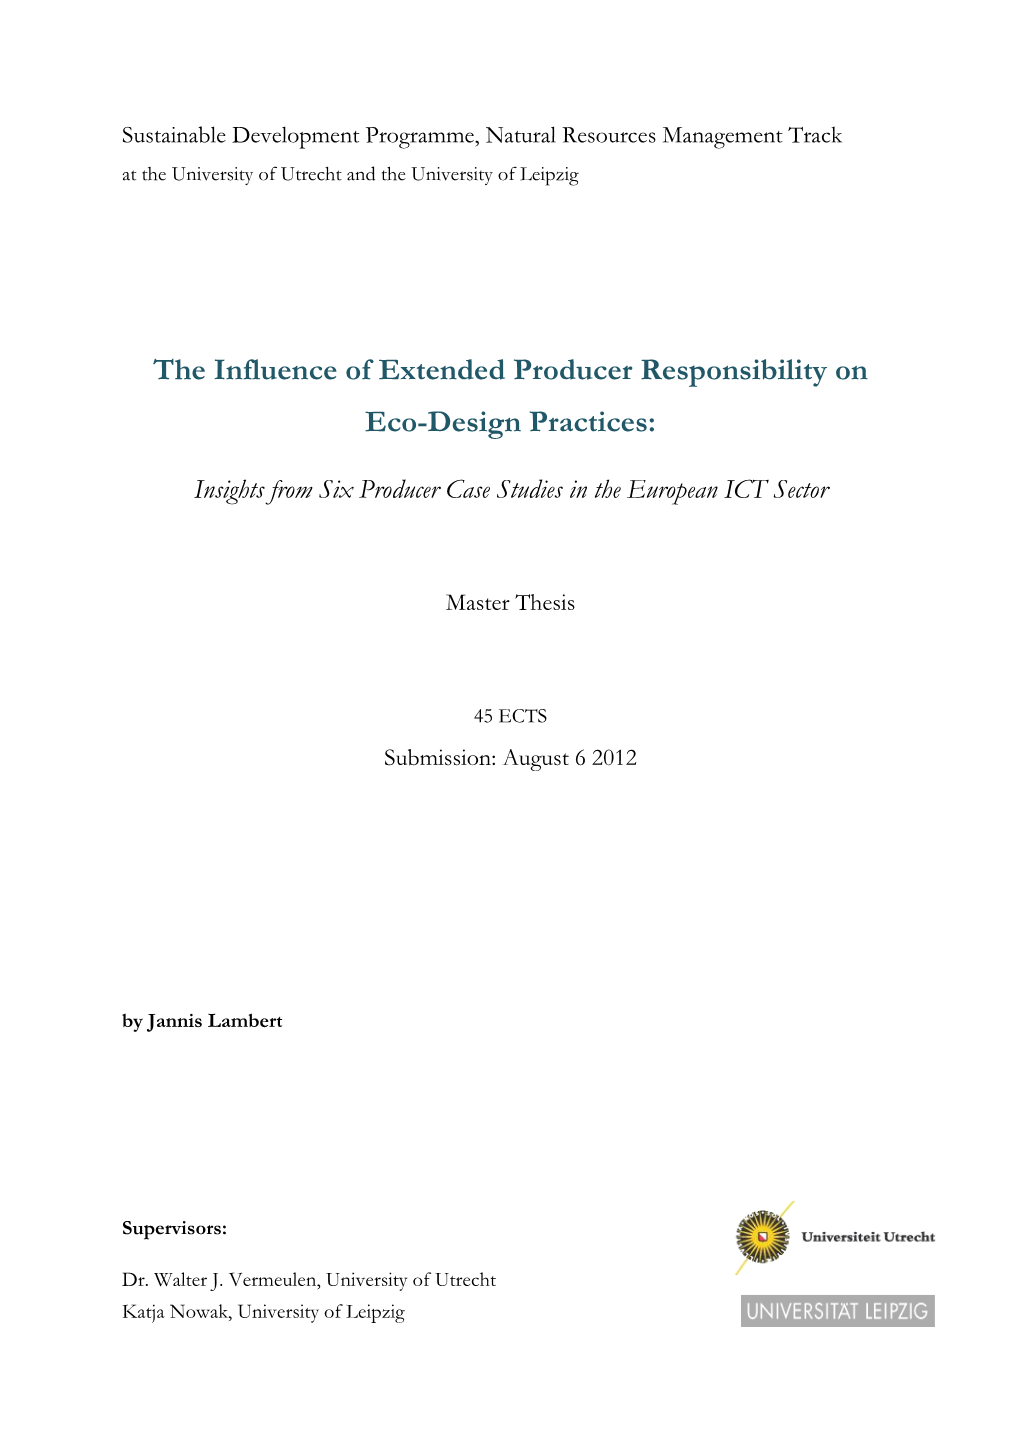 The Influence of Extended Producer Responsibility on Eco-Design Practices